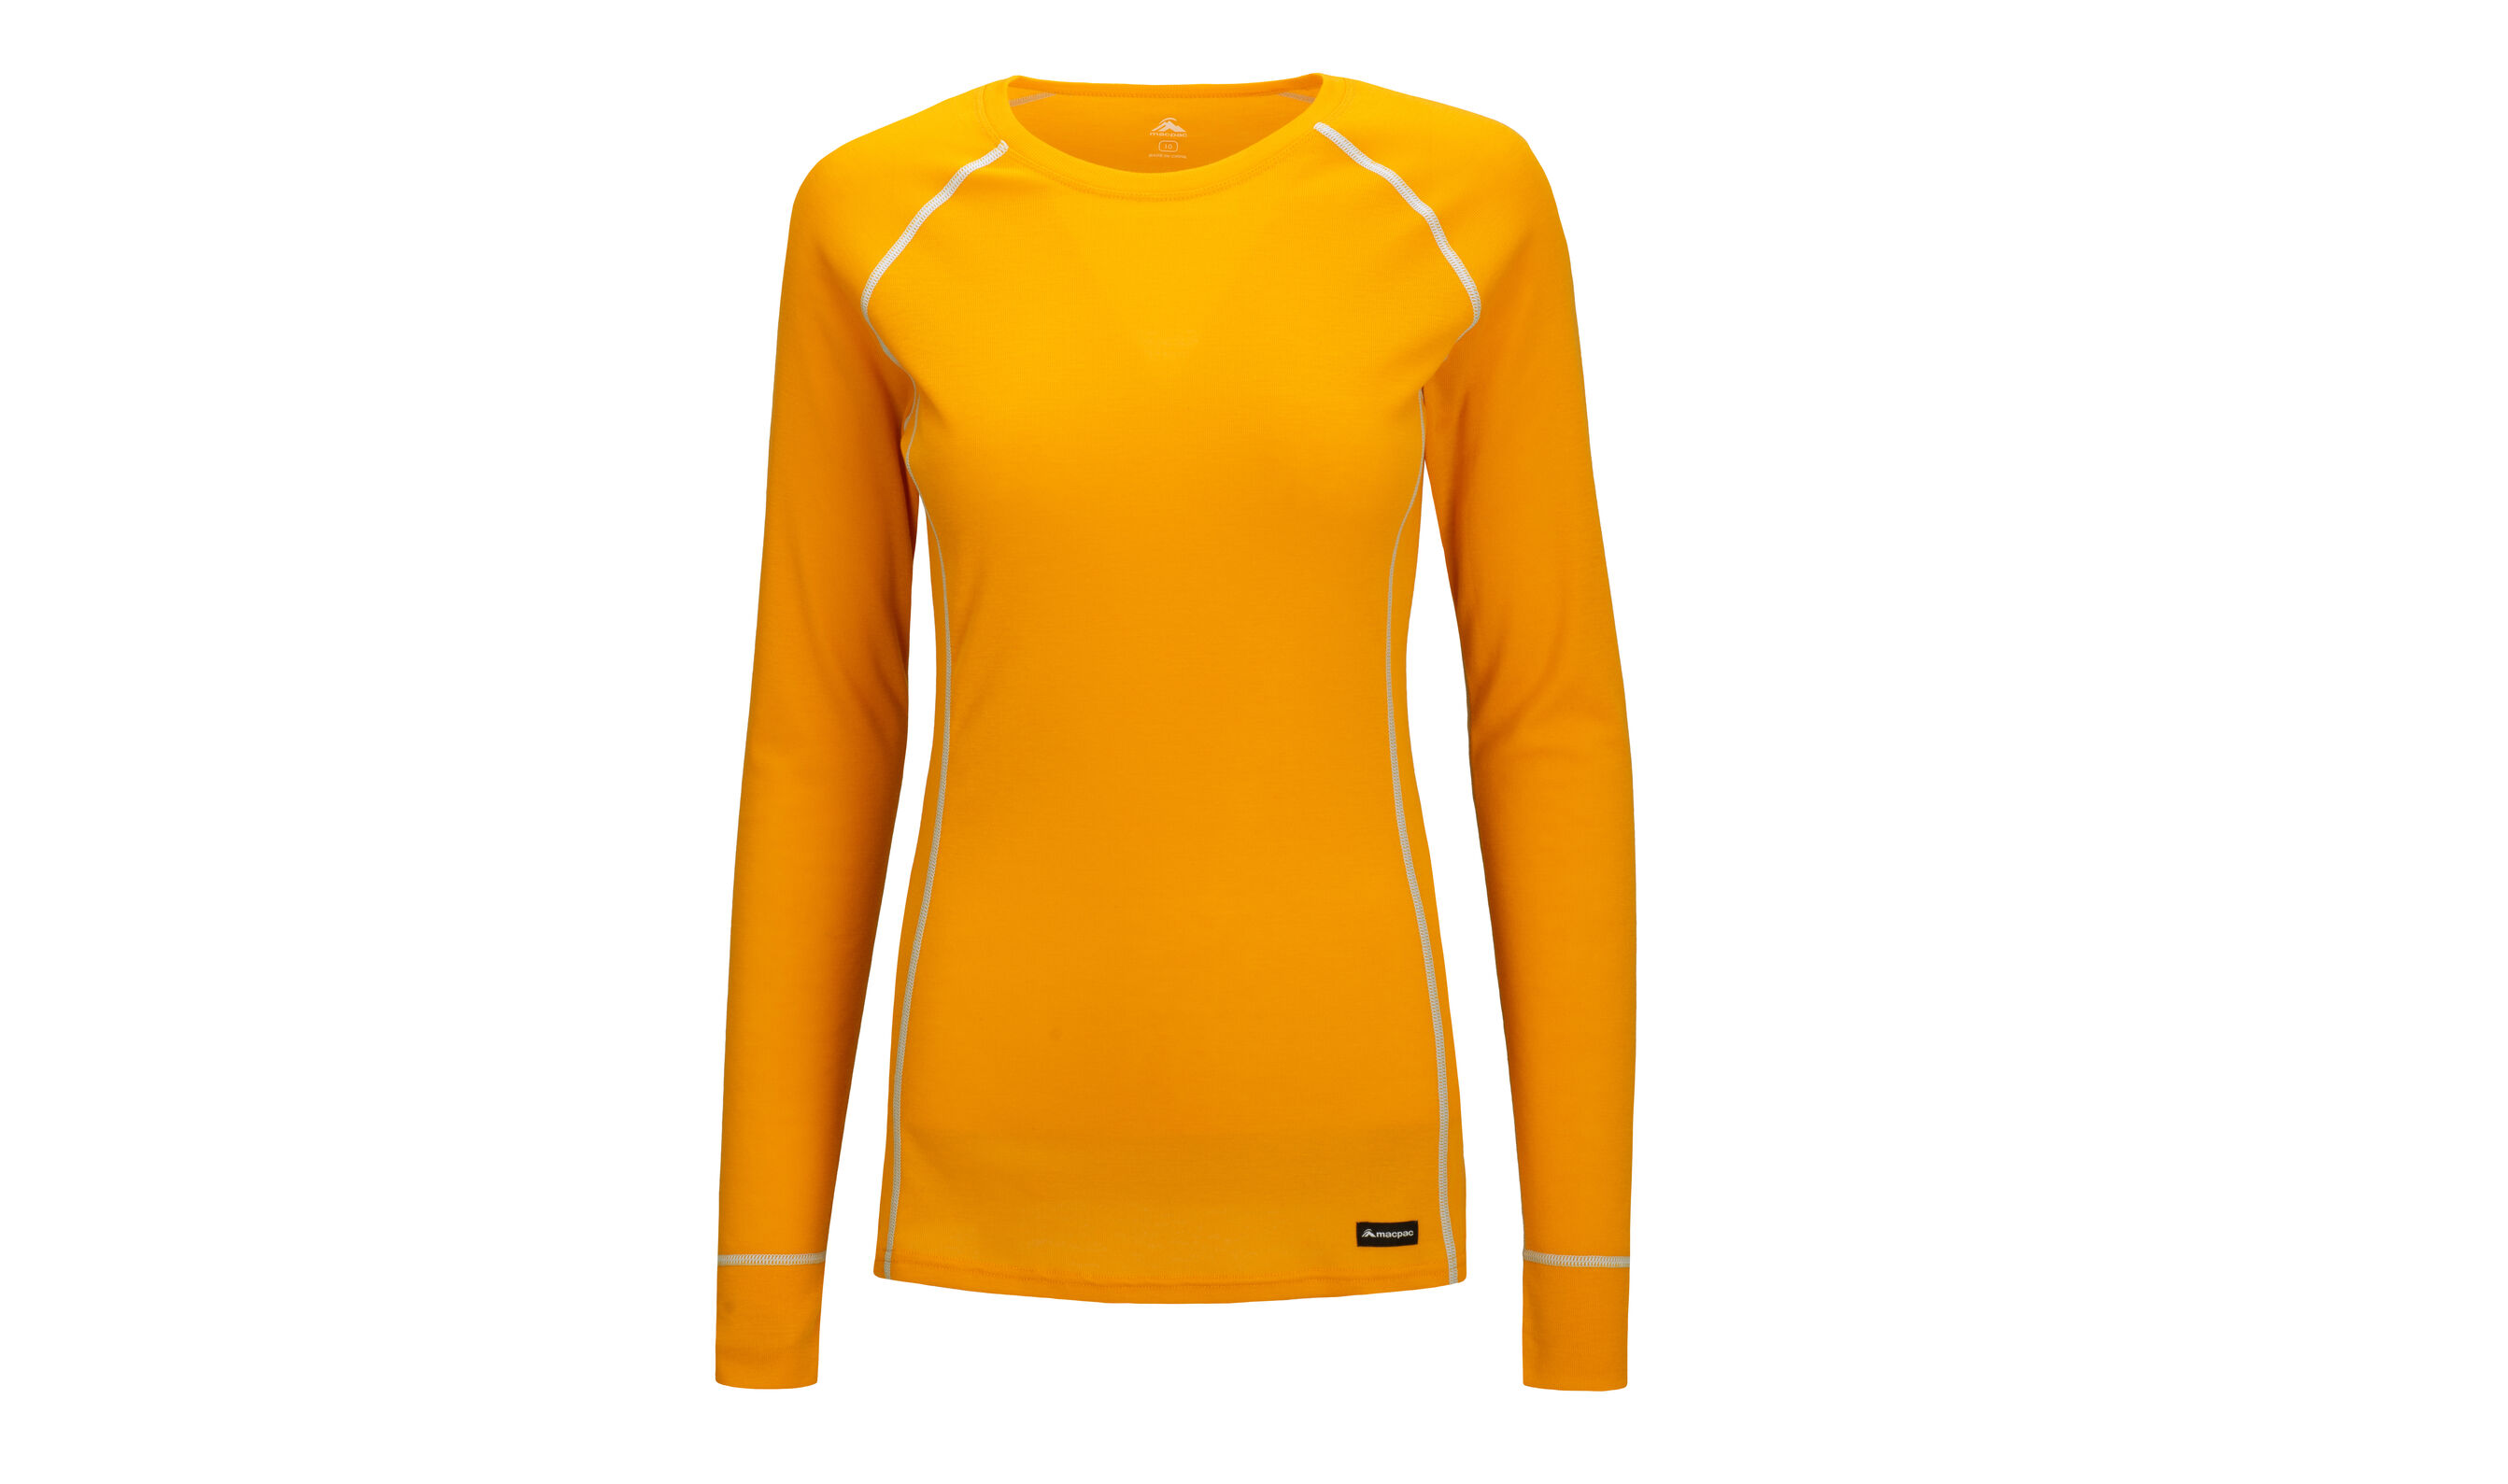 51% OFF on Macpac Women's Geothermal Long Sleeve Top now $24[FREE Click & Collect]